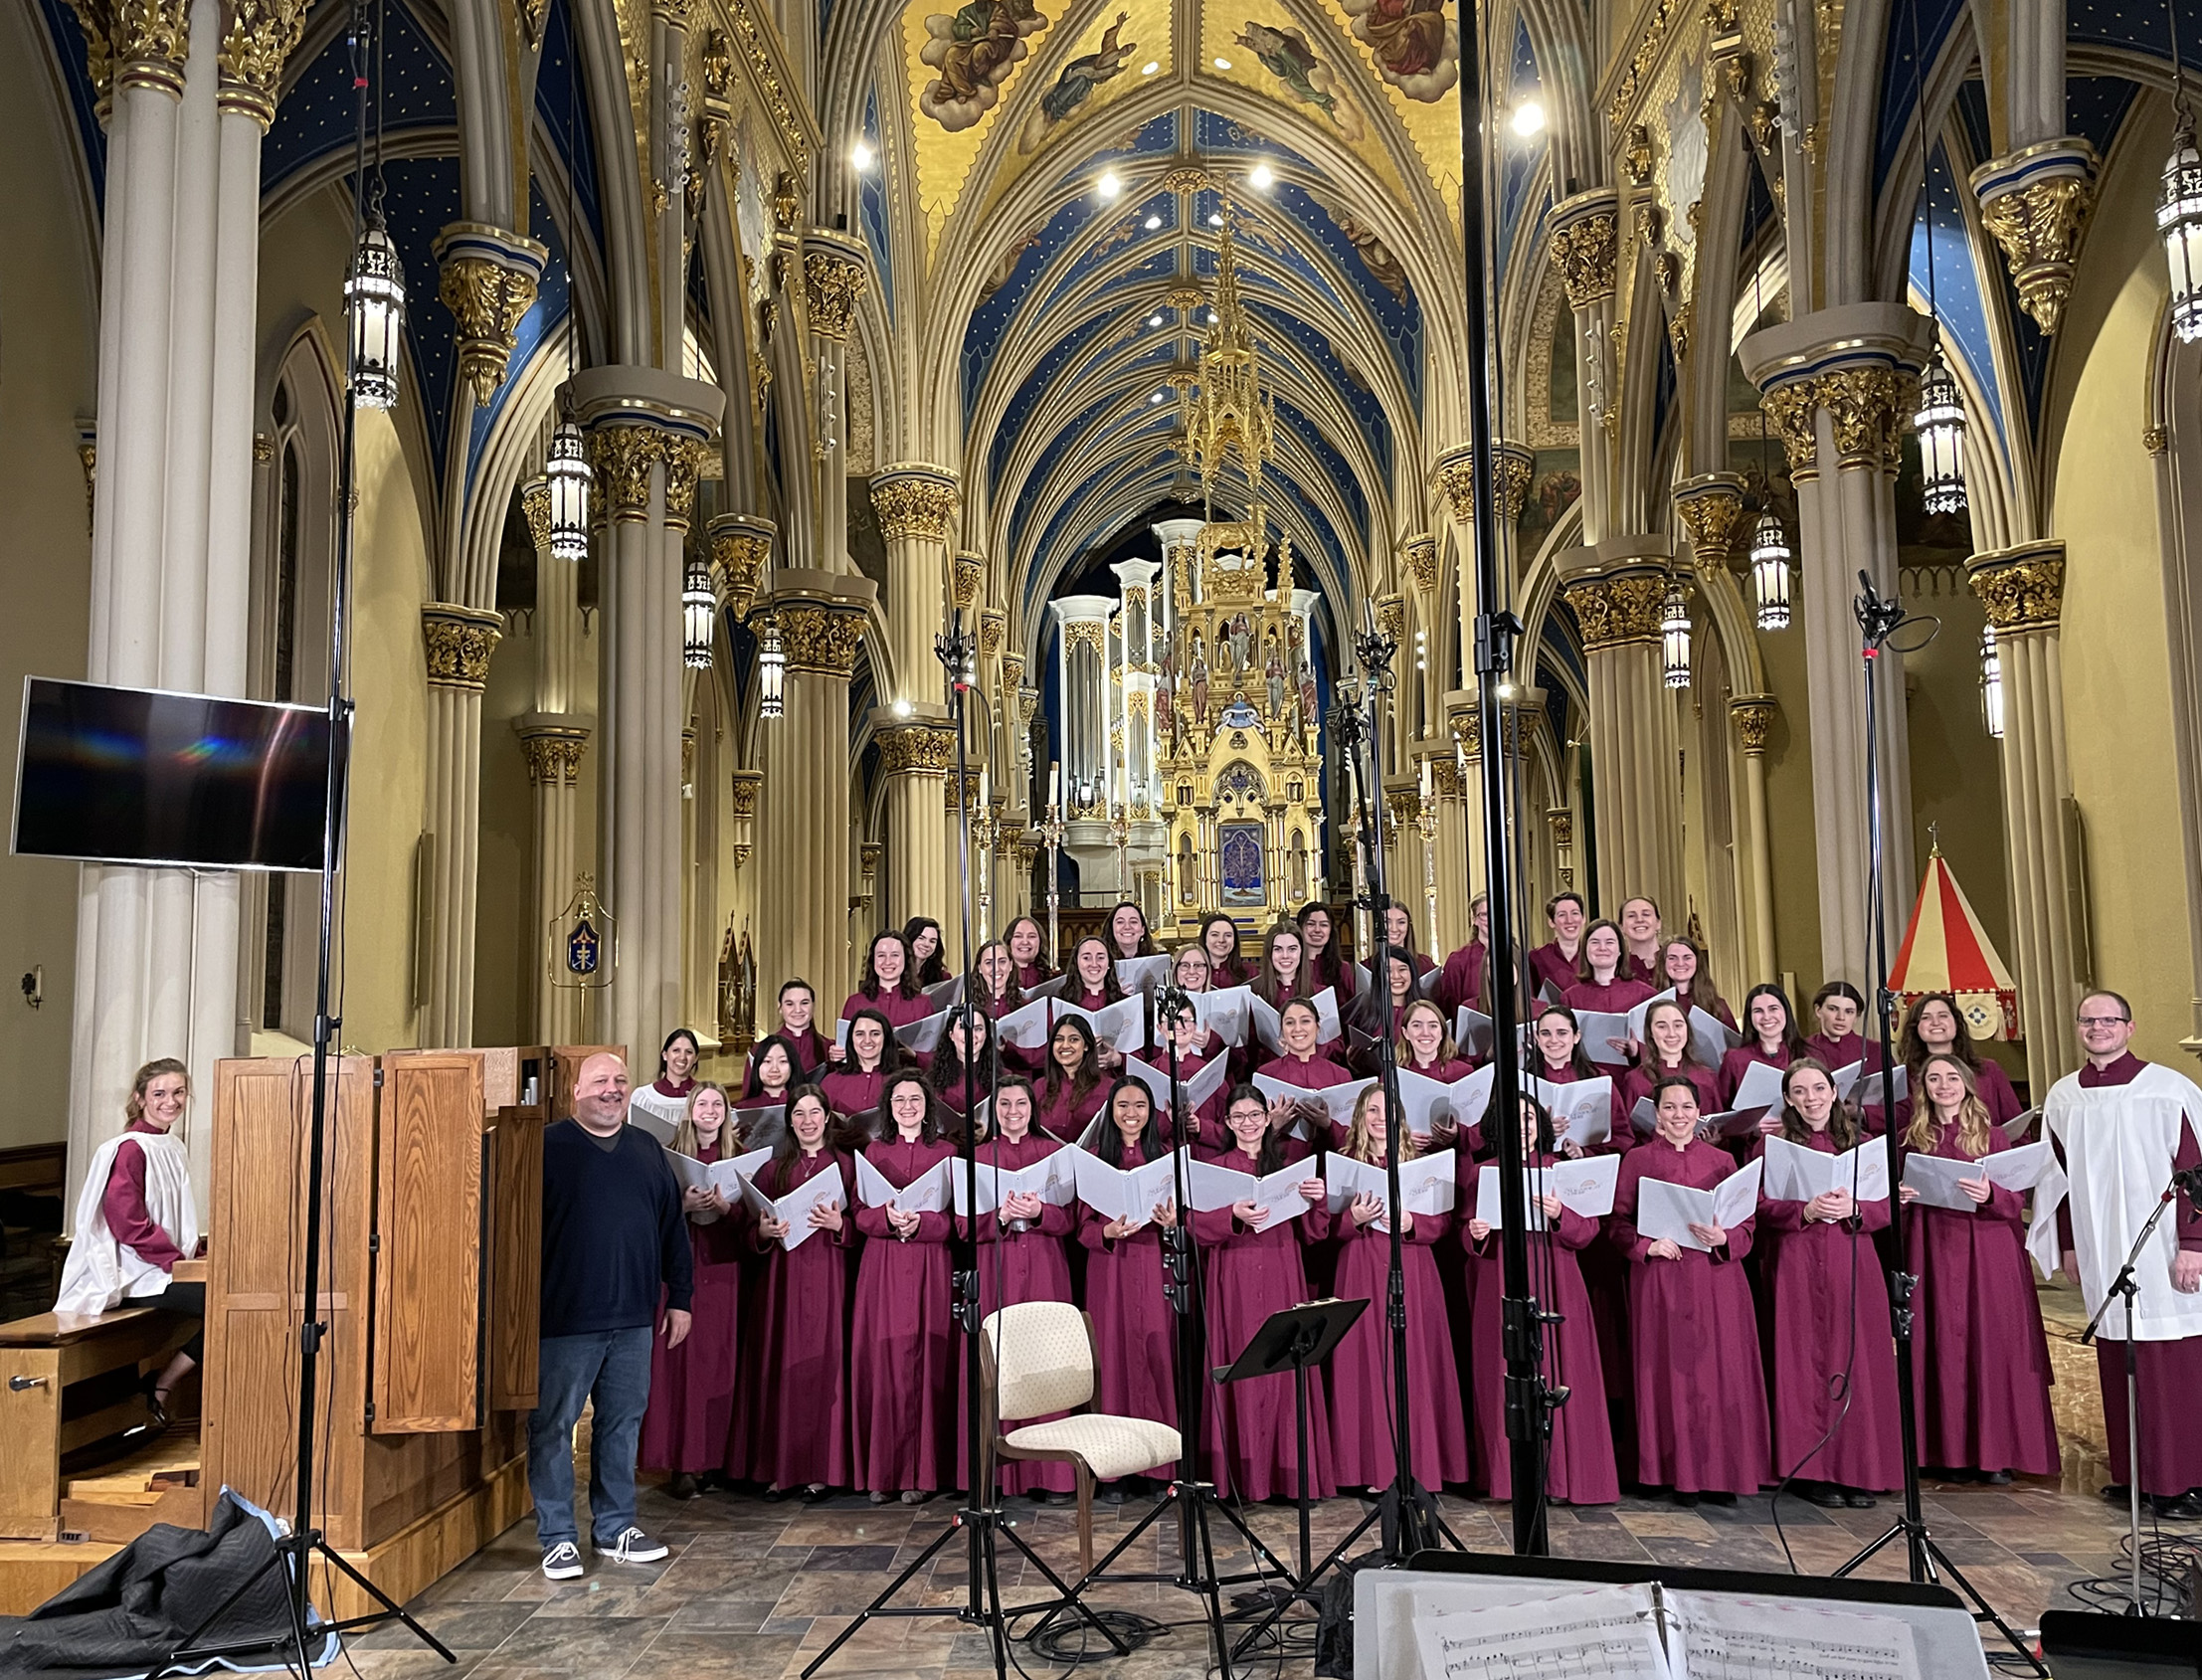 Sanken CUX-100K microphones were used in the Basilica of the Sacred Heart